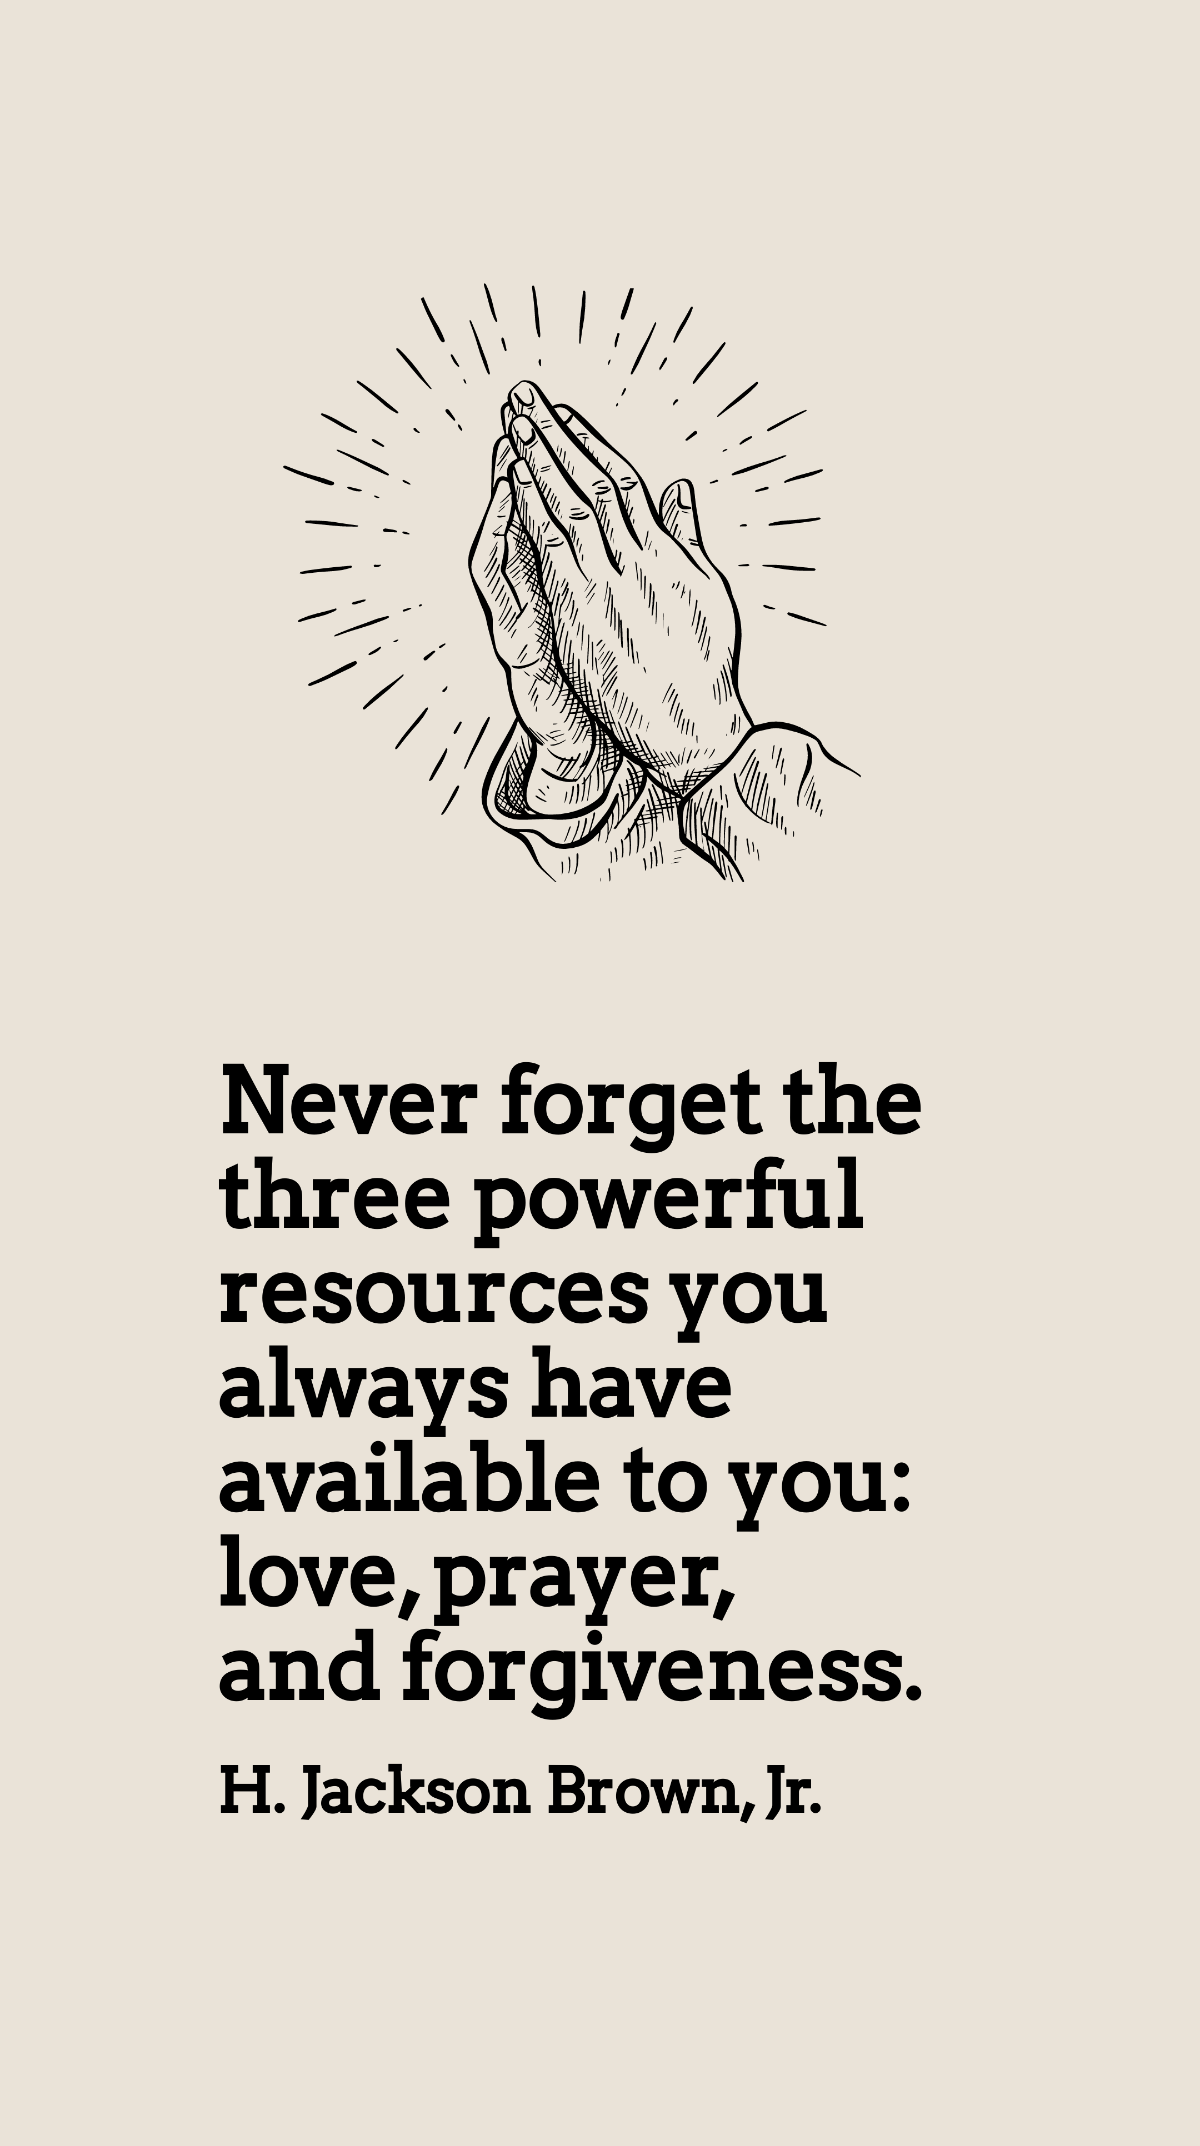 H. Jackson Brown, Jr. - Never forget the three powerful resources you always have available to you: love, prayer, and forgiveness. Template